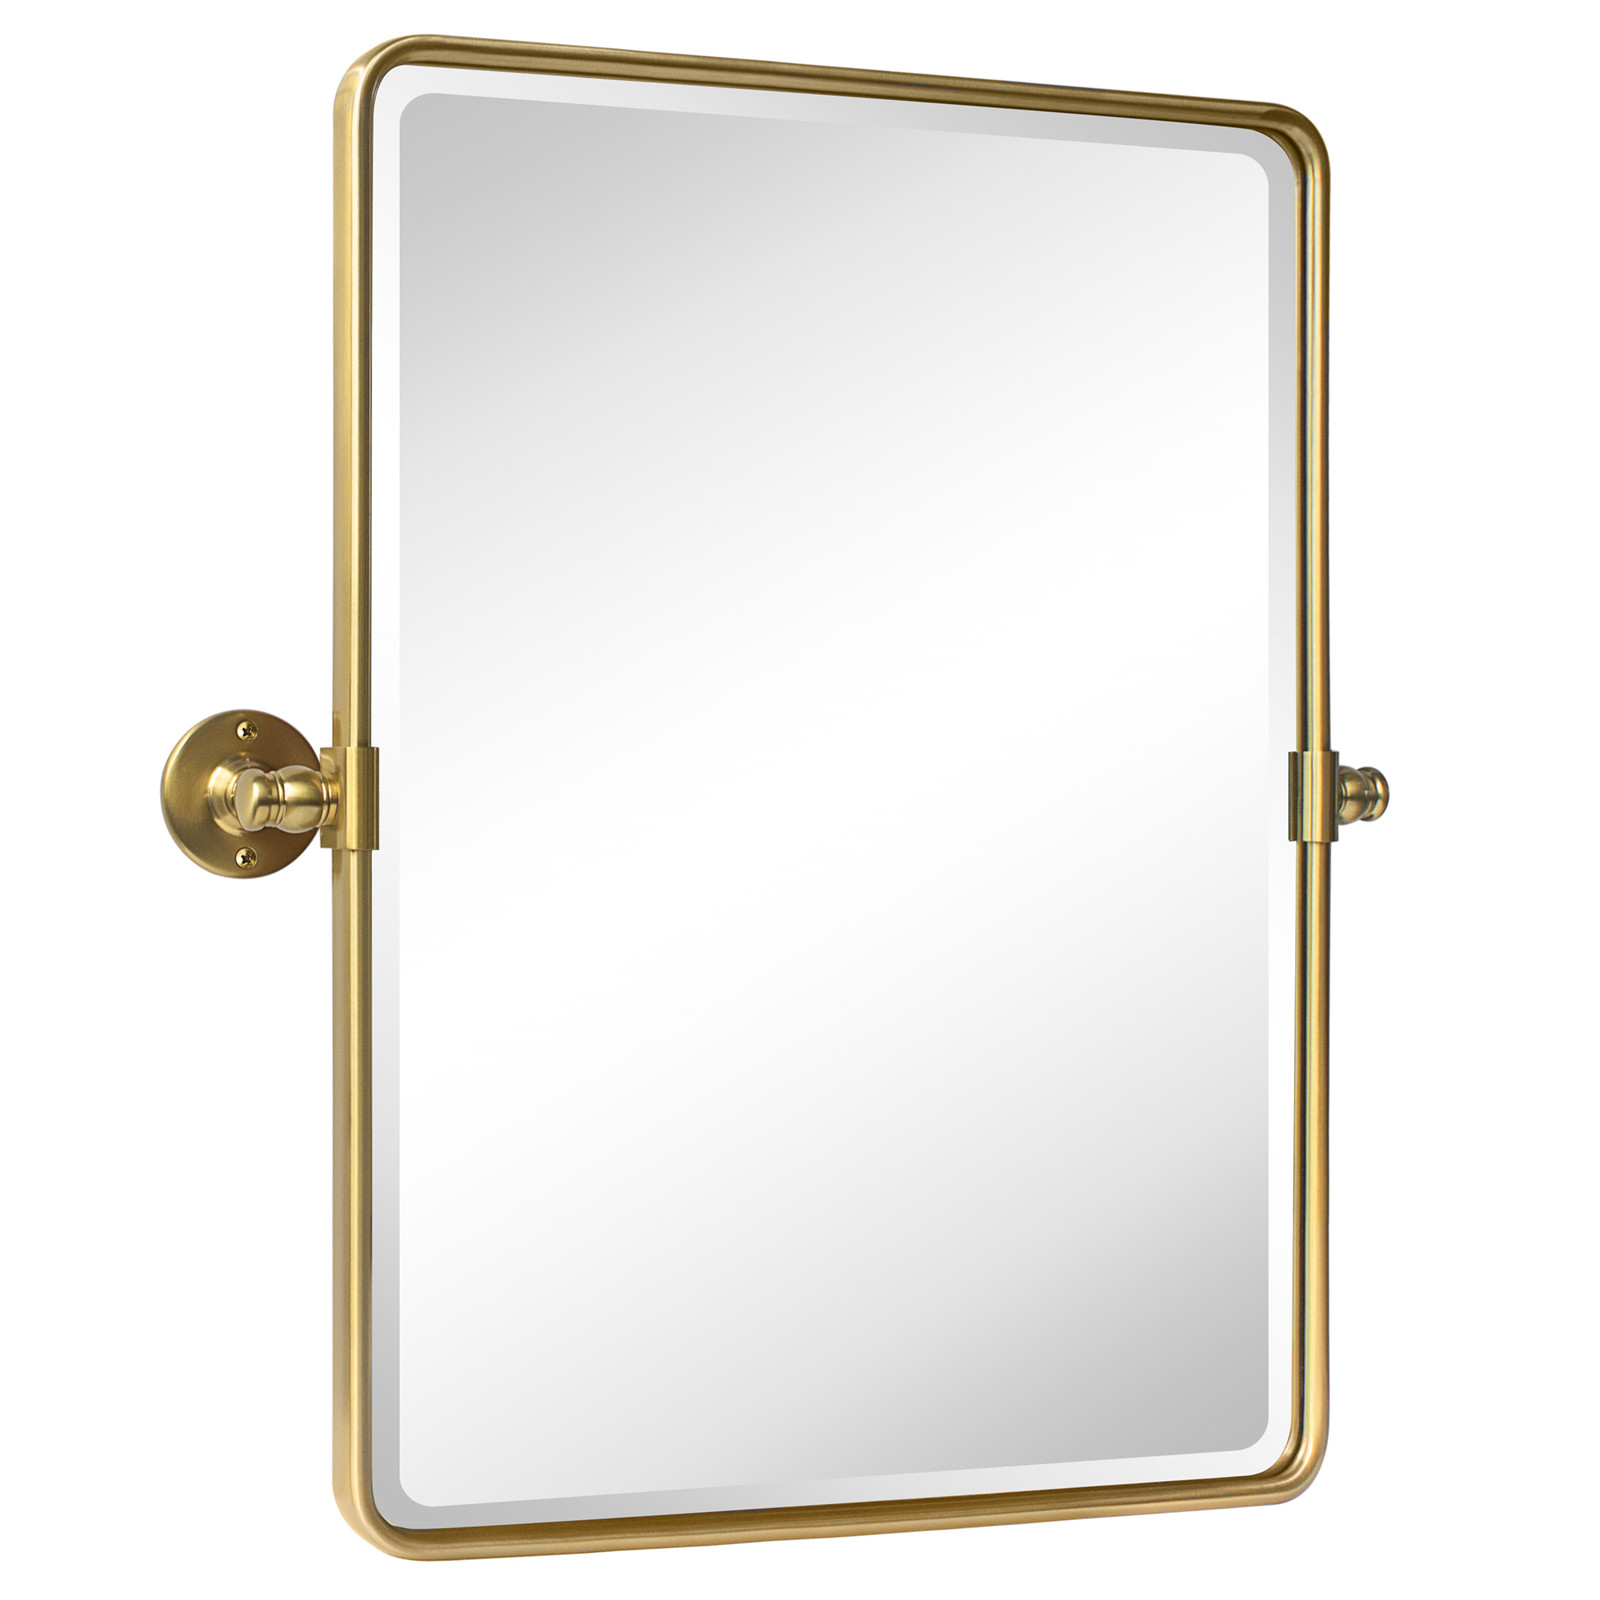 Woodvale Rectangle Metal Wall Mirror-19x24-Brushed Gold